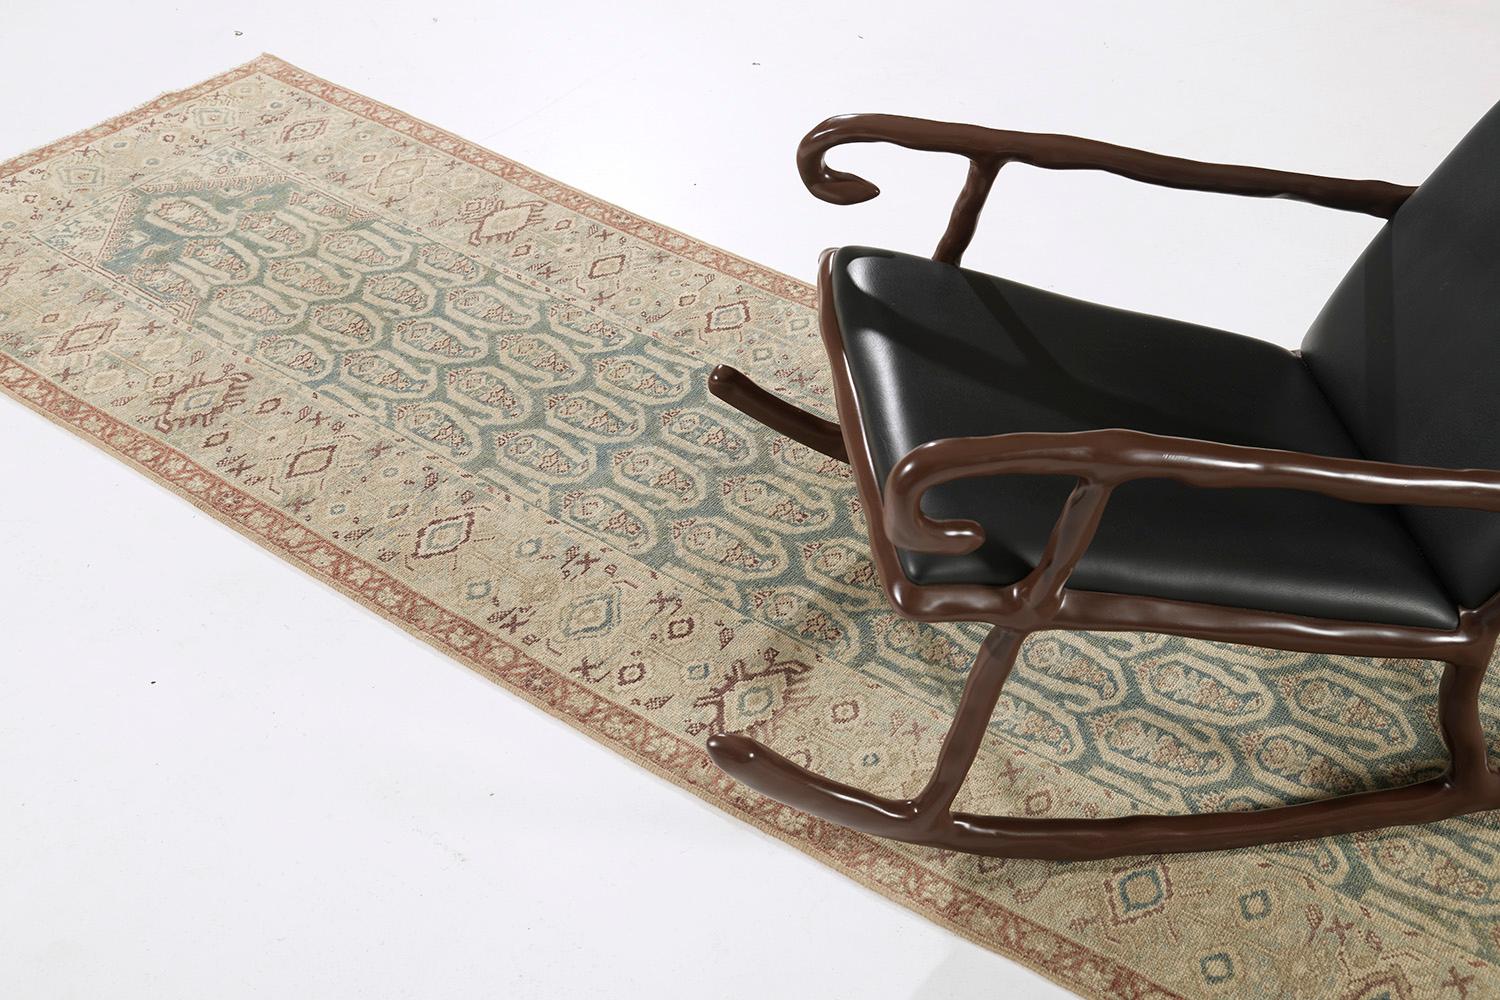 A remarkable hand-spun wool Persian Malayer Runner has immensely flexed its Bote-styled pattern along the perimeter of emblems and symbols in the teal ground. It is surrounded by different kinds of symbolic imprints in brown and gold elements. The